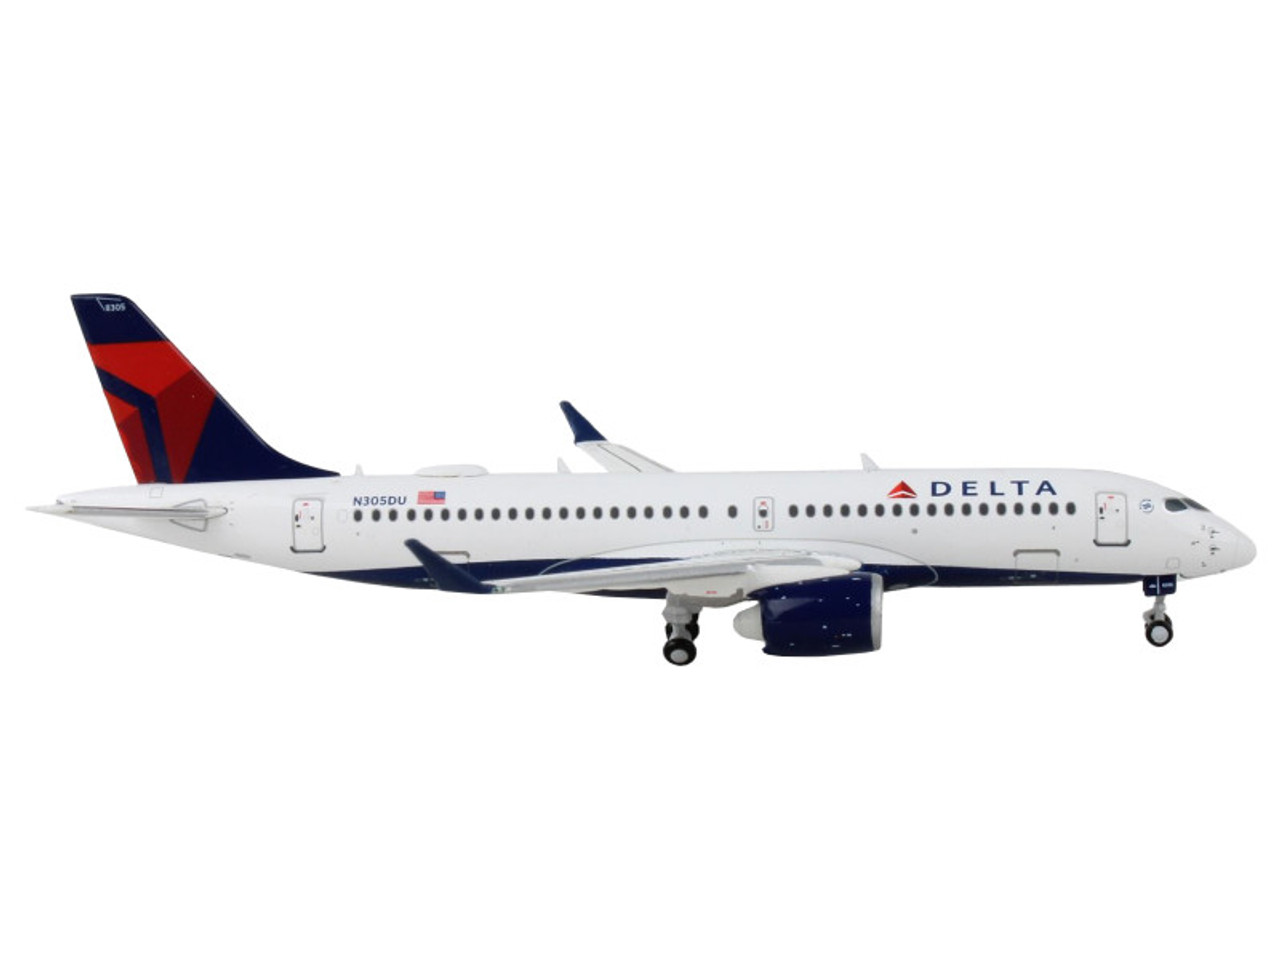 Airbus A220-300 Commercial Aircraft "Delta Airlines" White with Blue and Red Tail 1/400 Diecast Model Airplane by GeminiJets